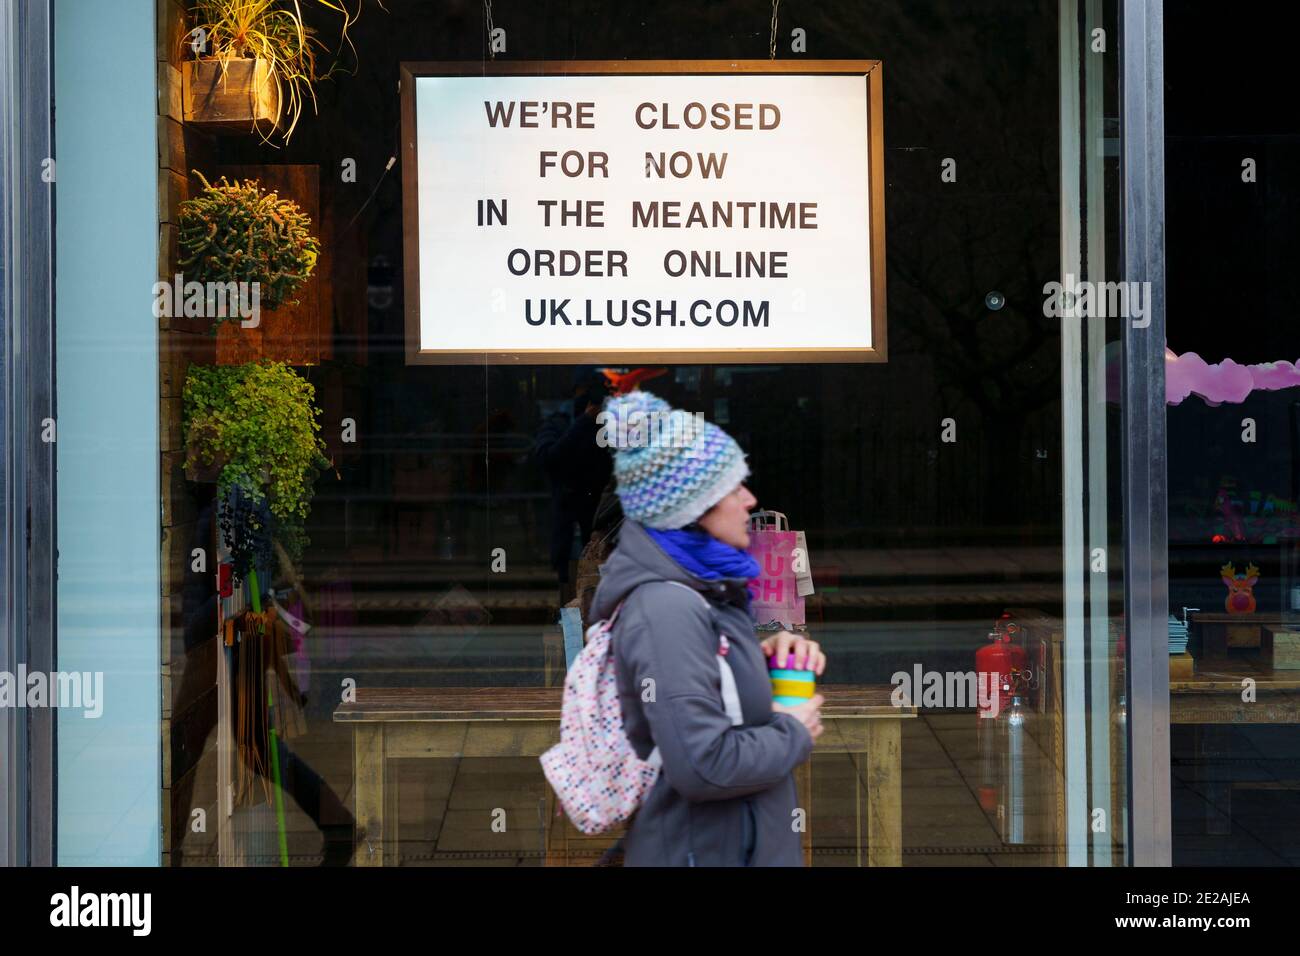 Edinburgh, Scotland, UK. 13 January 2021. Shops in Scotland now generally prohibited from offering Click and Collect service from front doors with some exceptions depending on type of goods on sale. Pic; Lush has closed and not offering C&C.   Iain Masterton/Alamy Live News Stock Photo